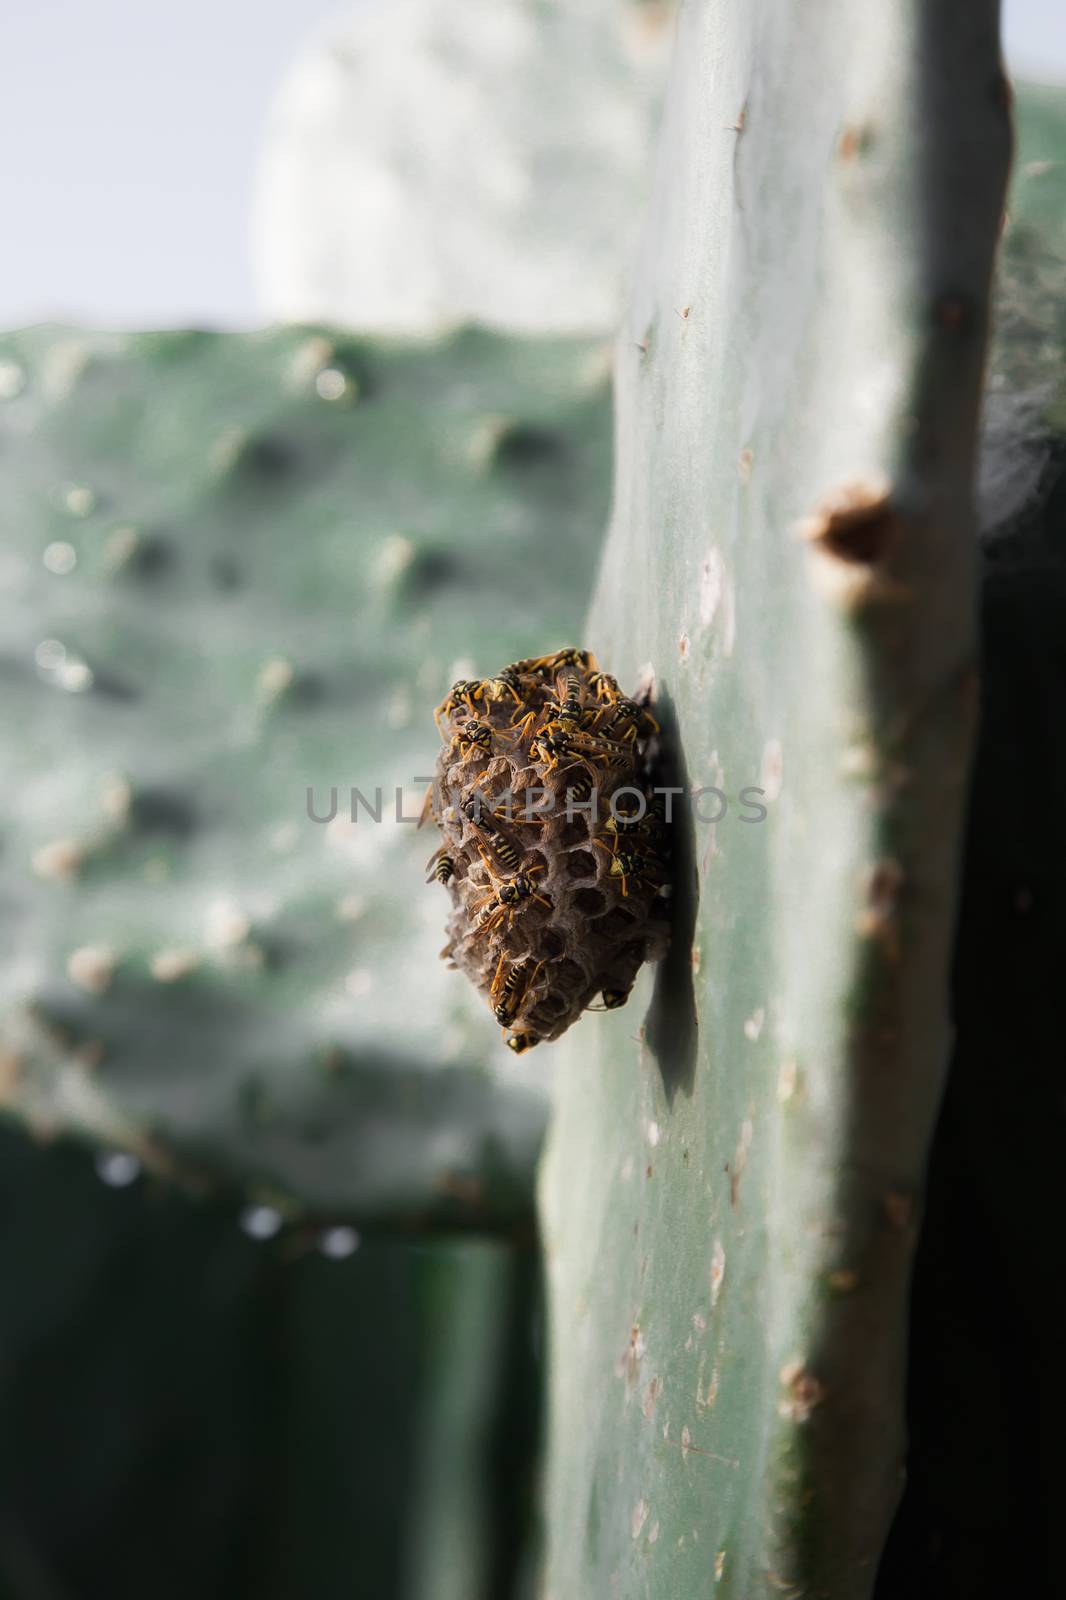 Wasp nest on a cactus leaf by sandra_fotodesign